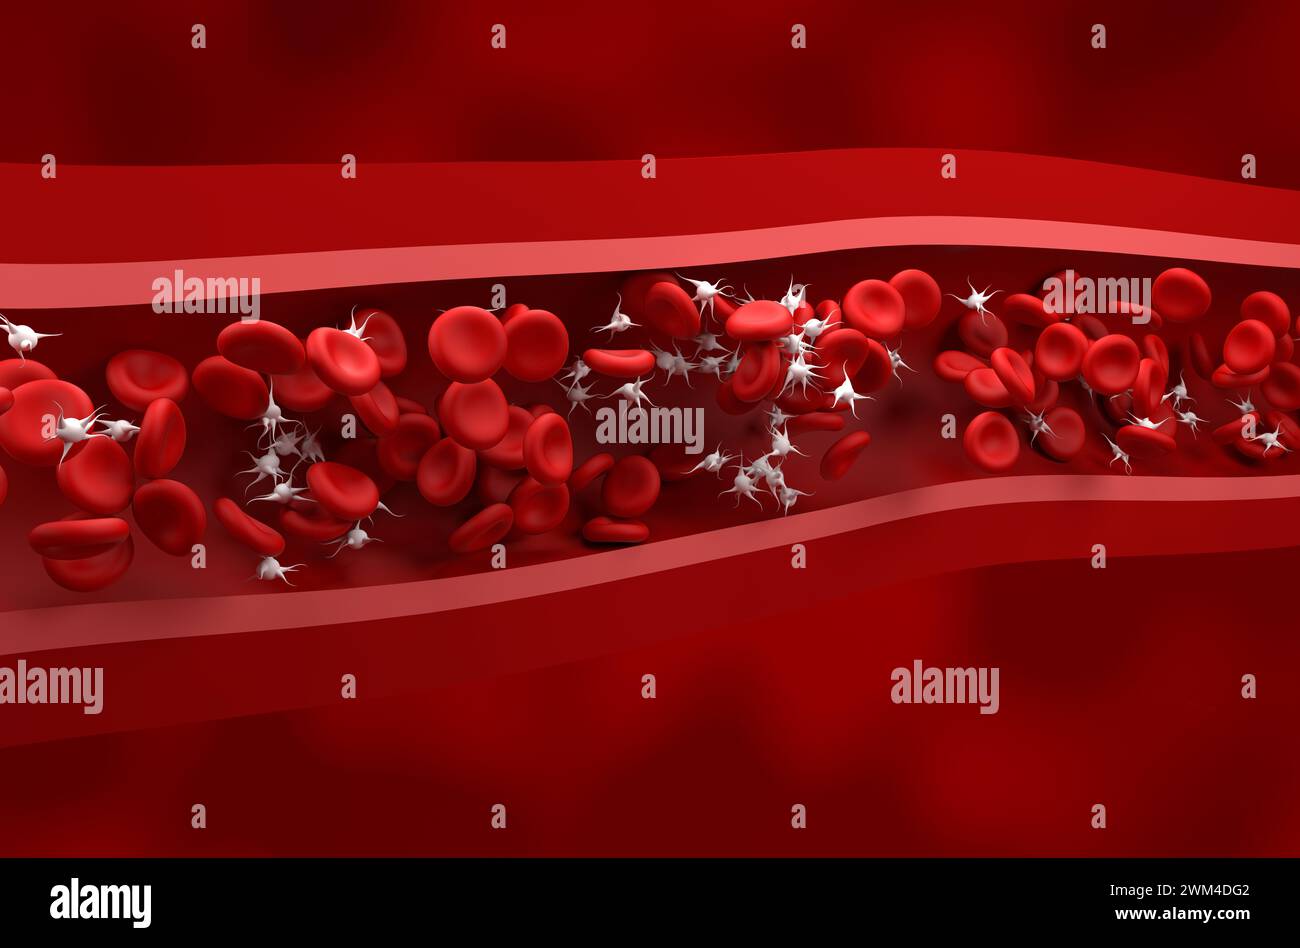 Normal platelet (thrombocytes) count in the blood - isometric view 3d illustration Stock Photo